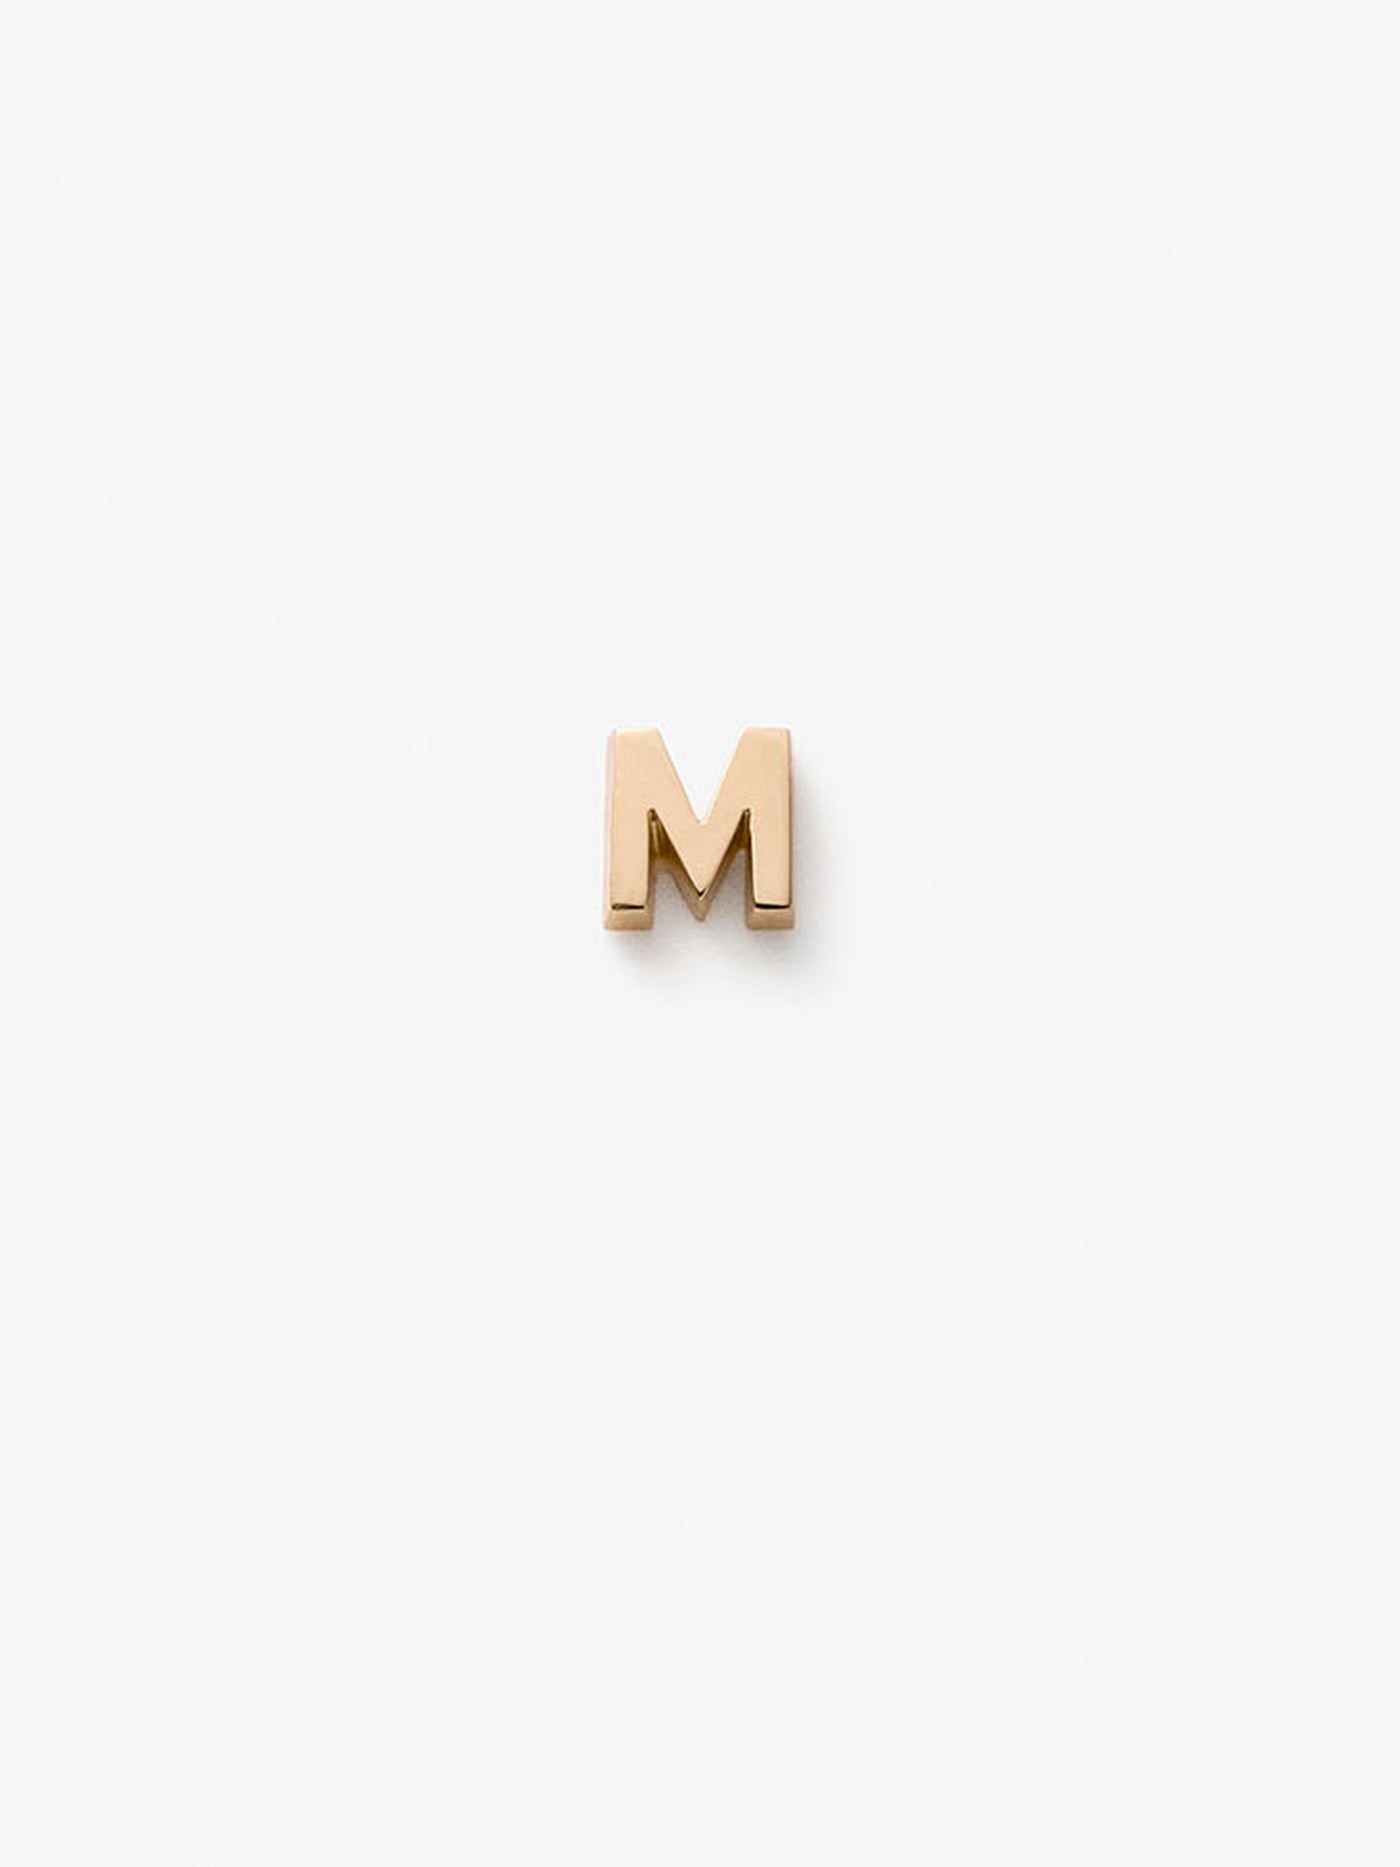 One Letter M in 18k Gold